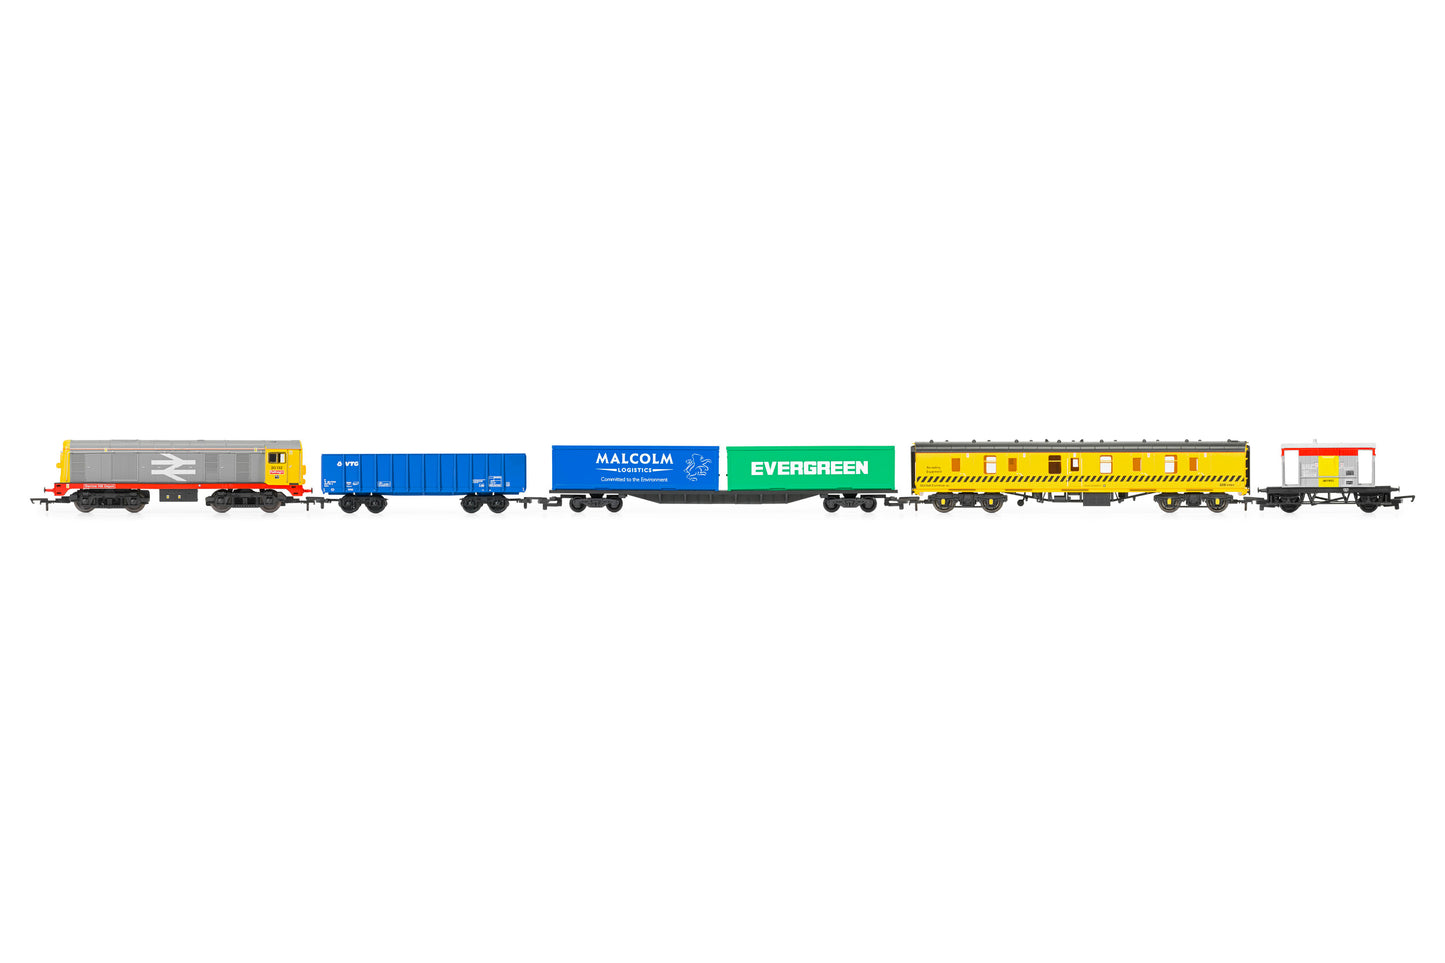 Hornby R1272M - Freightmaster Train Set